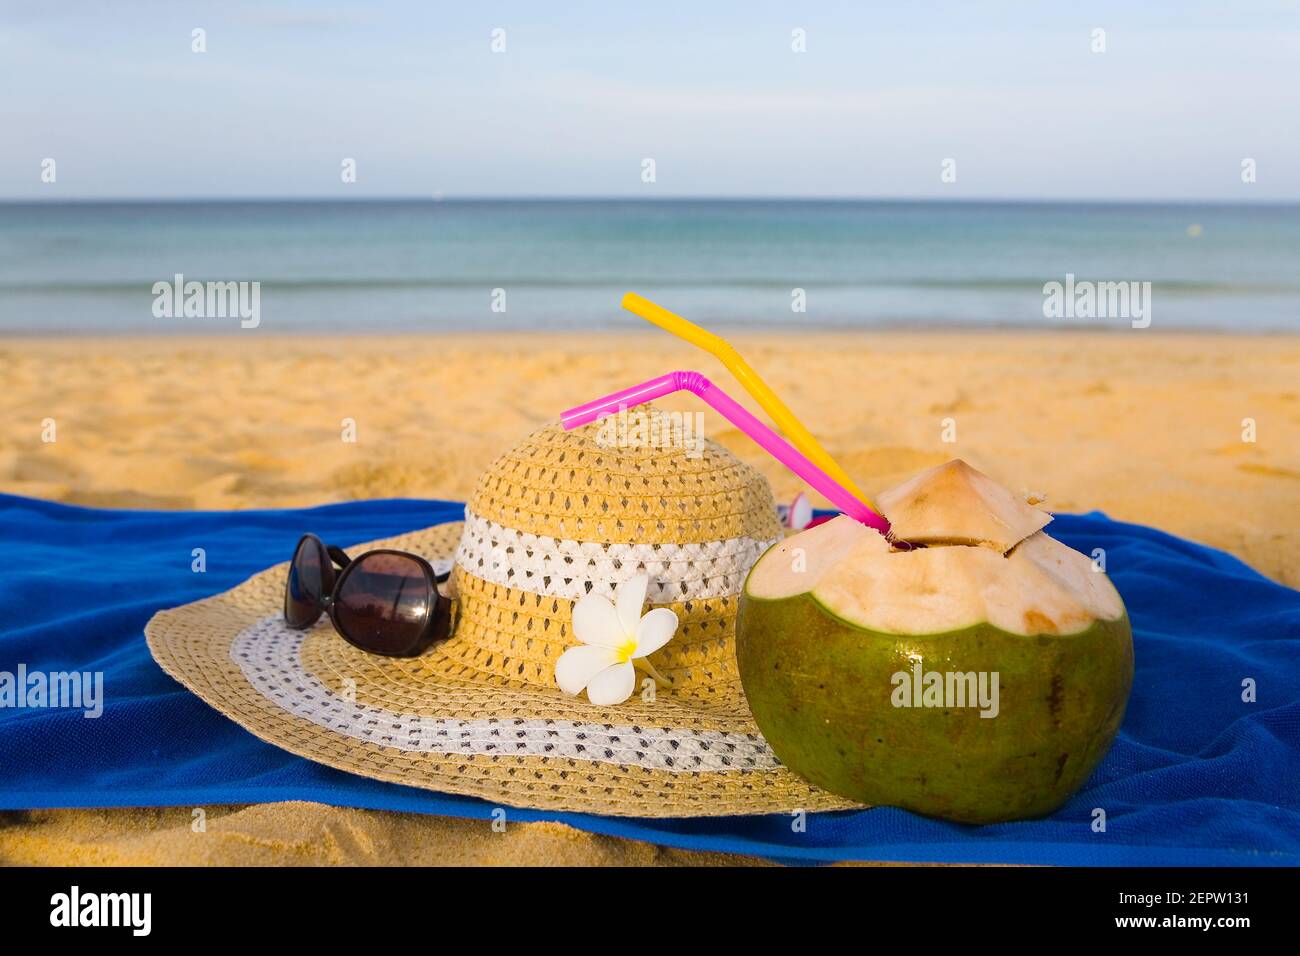 On the sandy beach are sun glasses, a hat and a coconut fruit. Resort. Stock Photo